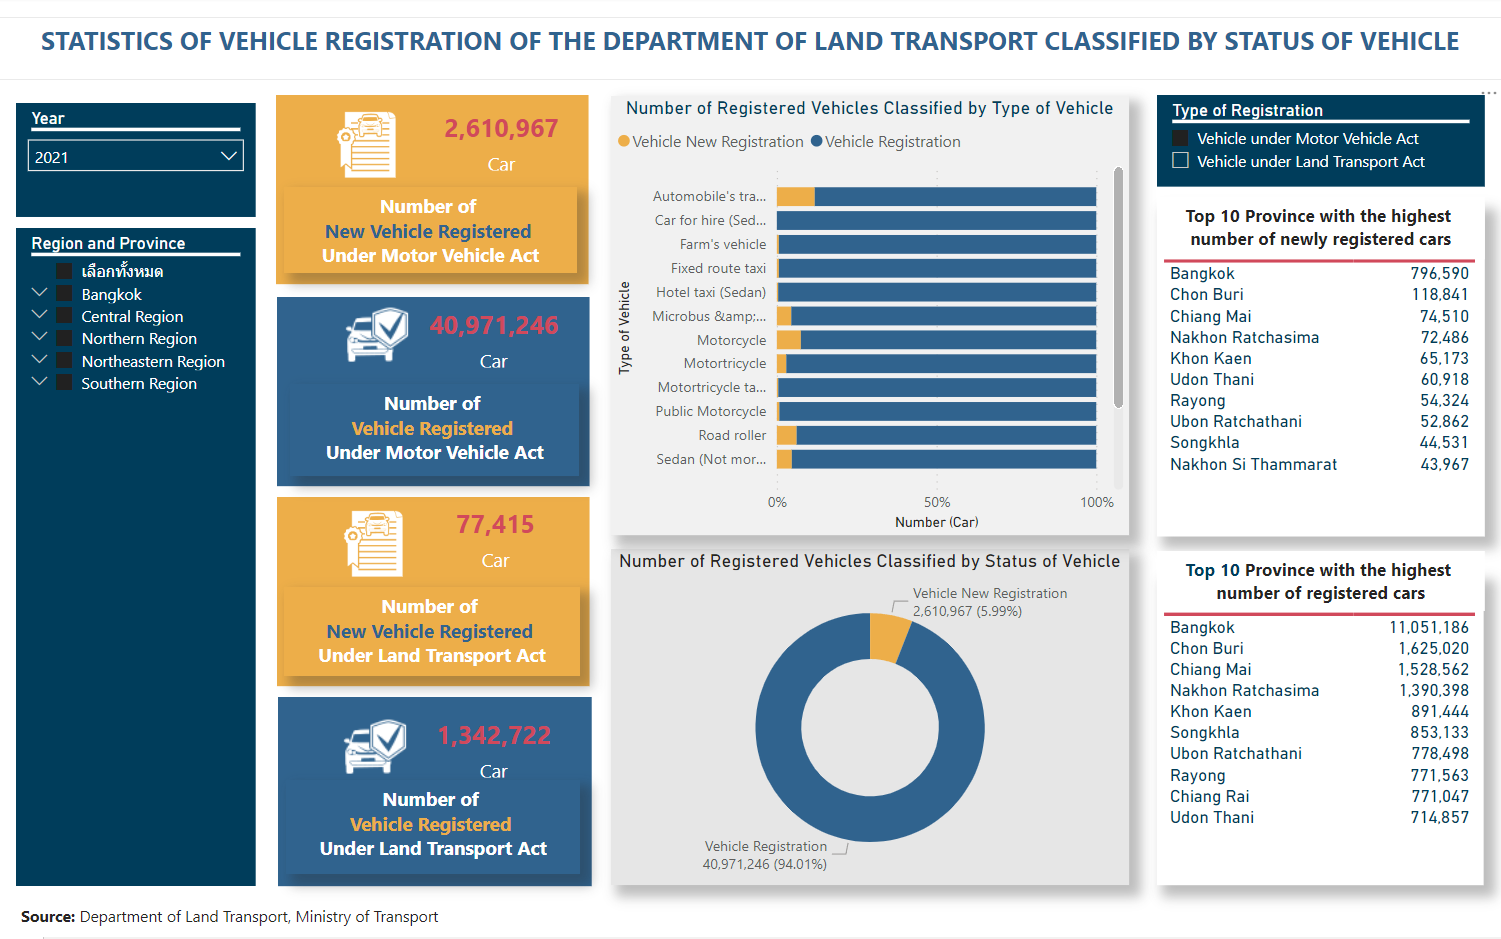 STATISTICS OF VEHICLE REGISTRATION OF THE DEPARTMENT OF LAND TRANSPORT CLASSIFIED BY STATUS OF VEHICLE